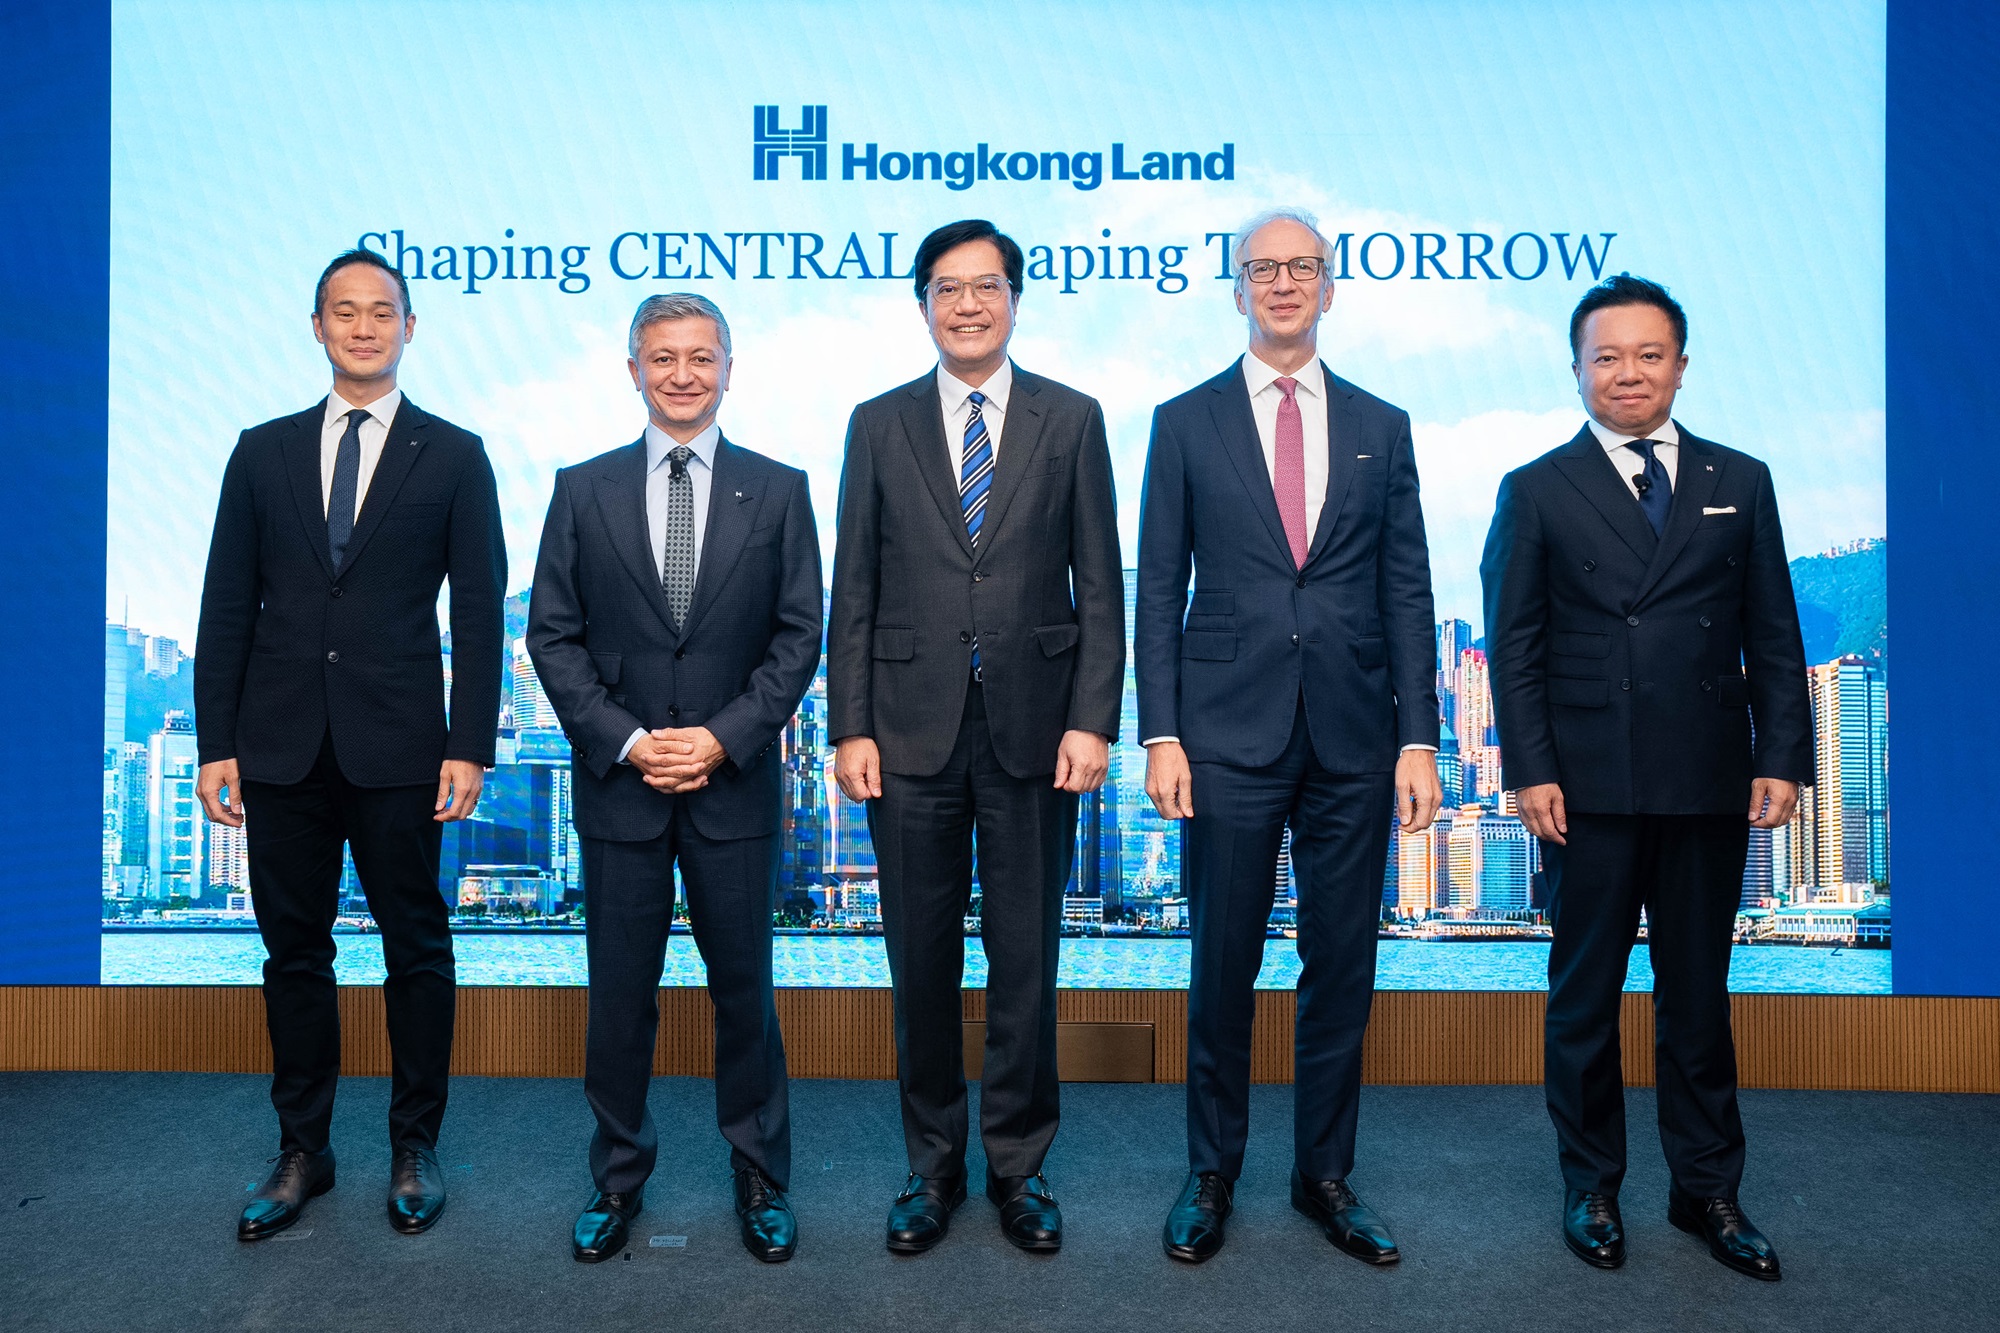 Hongkong Land today unveils a transformation plan to further elevate its Central Portfolio, cementing Hong Kong’s status as a world-class premier destination for retail and business. (From left to right) Alexander Li, Chief Retail Officer, Commercial Property, Hong Kong & Macau, Hongkong Land; Michael Smith, Chief Executive, Hongkong Land; Michael Wong, GBS, JP, Deputy Financial Secretary; John Witt, Group Managing Director, Jardine Matheson; and Alvin Kong, Executive Director, Hongkong Land, attend the announcement event.